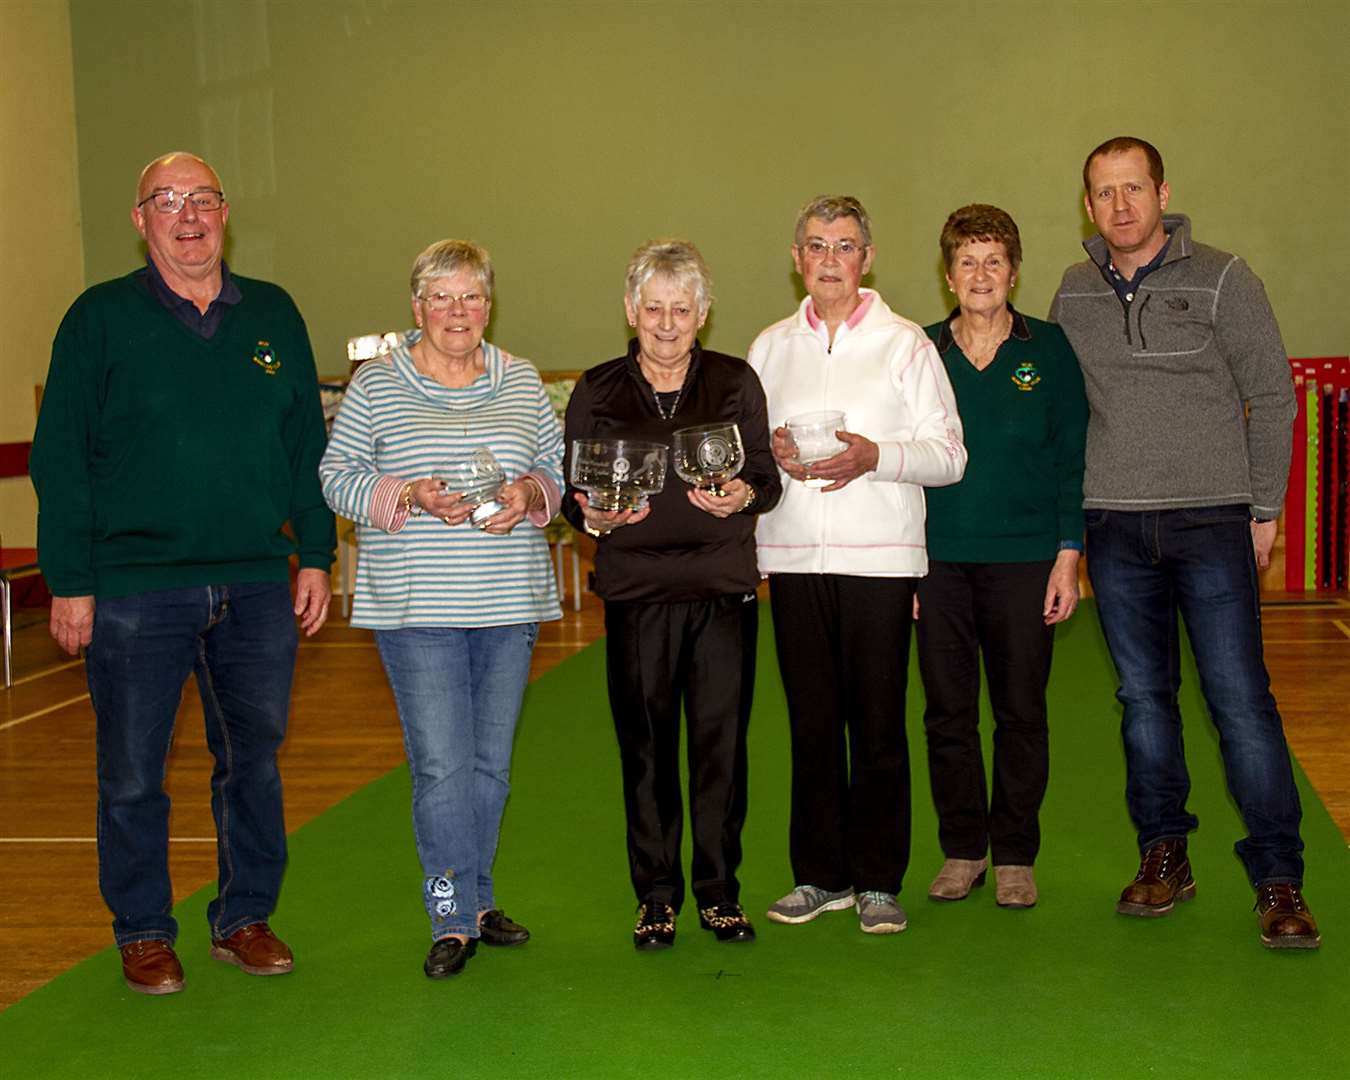 John Braid (left), president of Reay Bowling Club, and winners Kath Irons, Joan Bridge and Pam Barney, with Lillian Campbell and William Campbell (right).